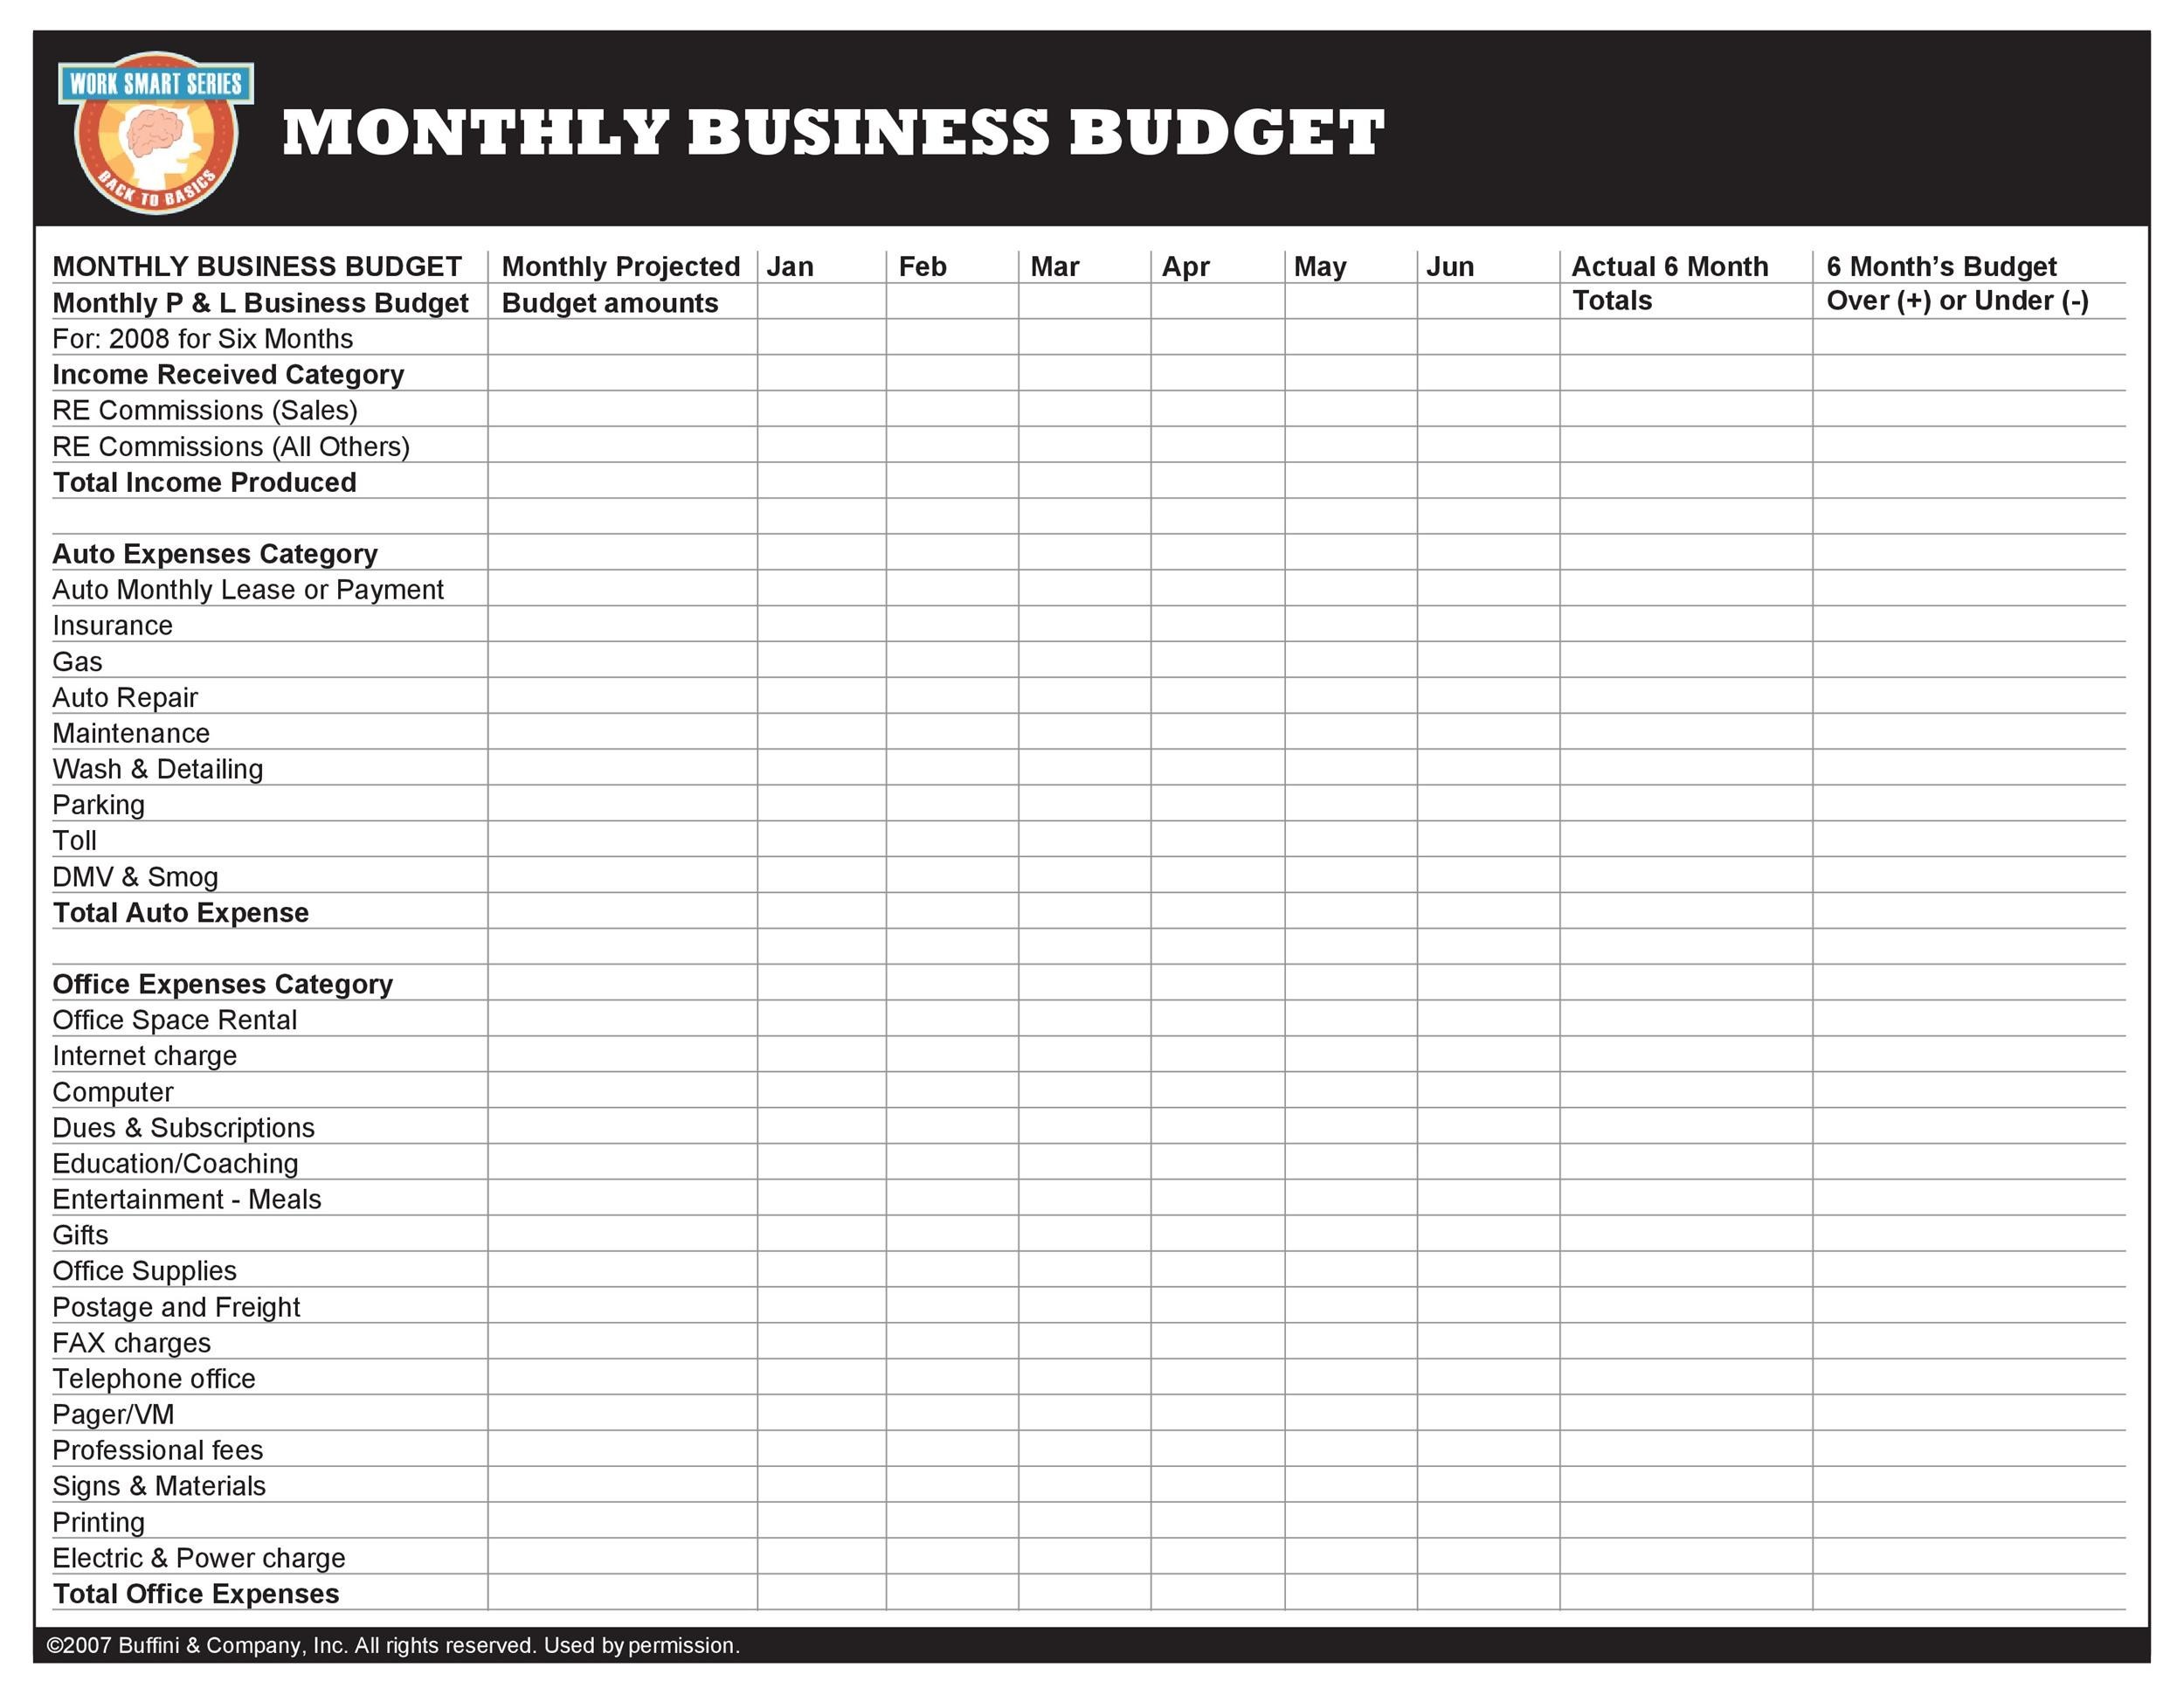 View 23+] Business Budget Expenses Template  Hip Restaurant Shirt With Small Business Expenses Spreadsheet Template